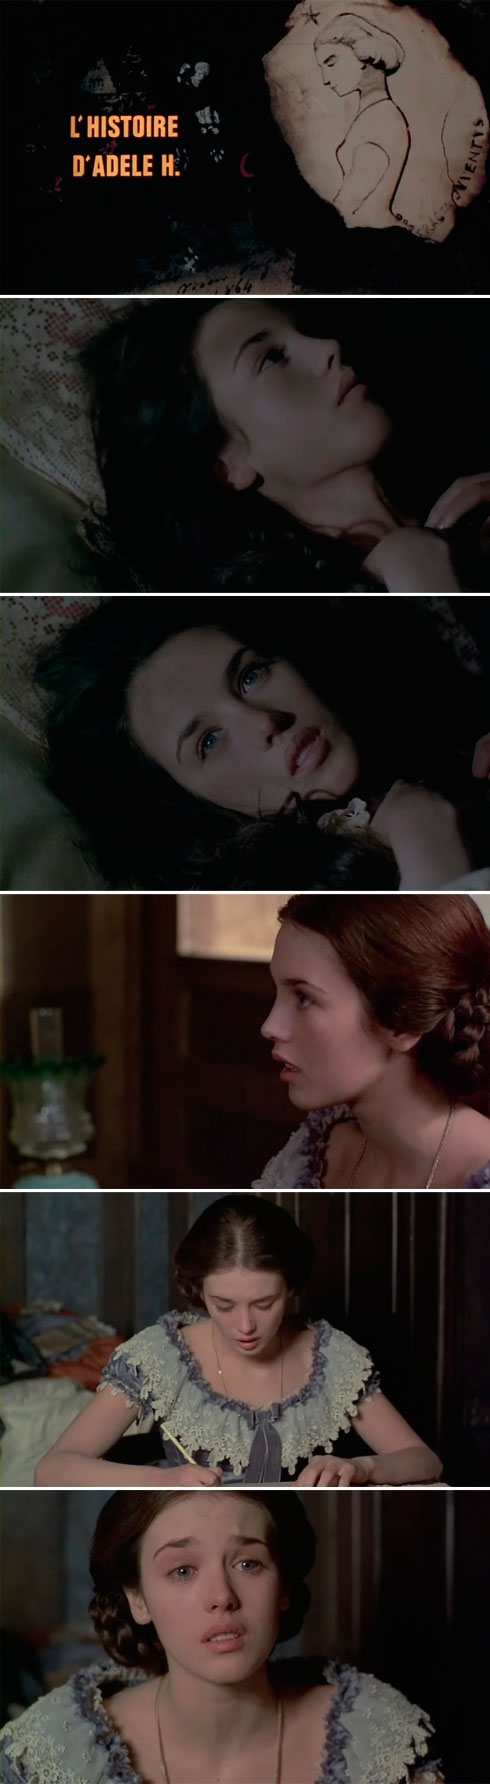 Movie stills from the movie L'Histoire D'Adele H.